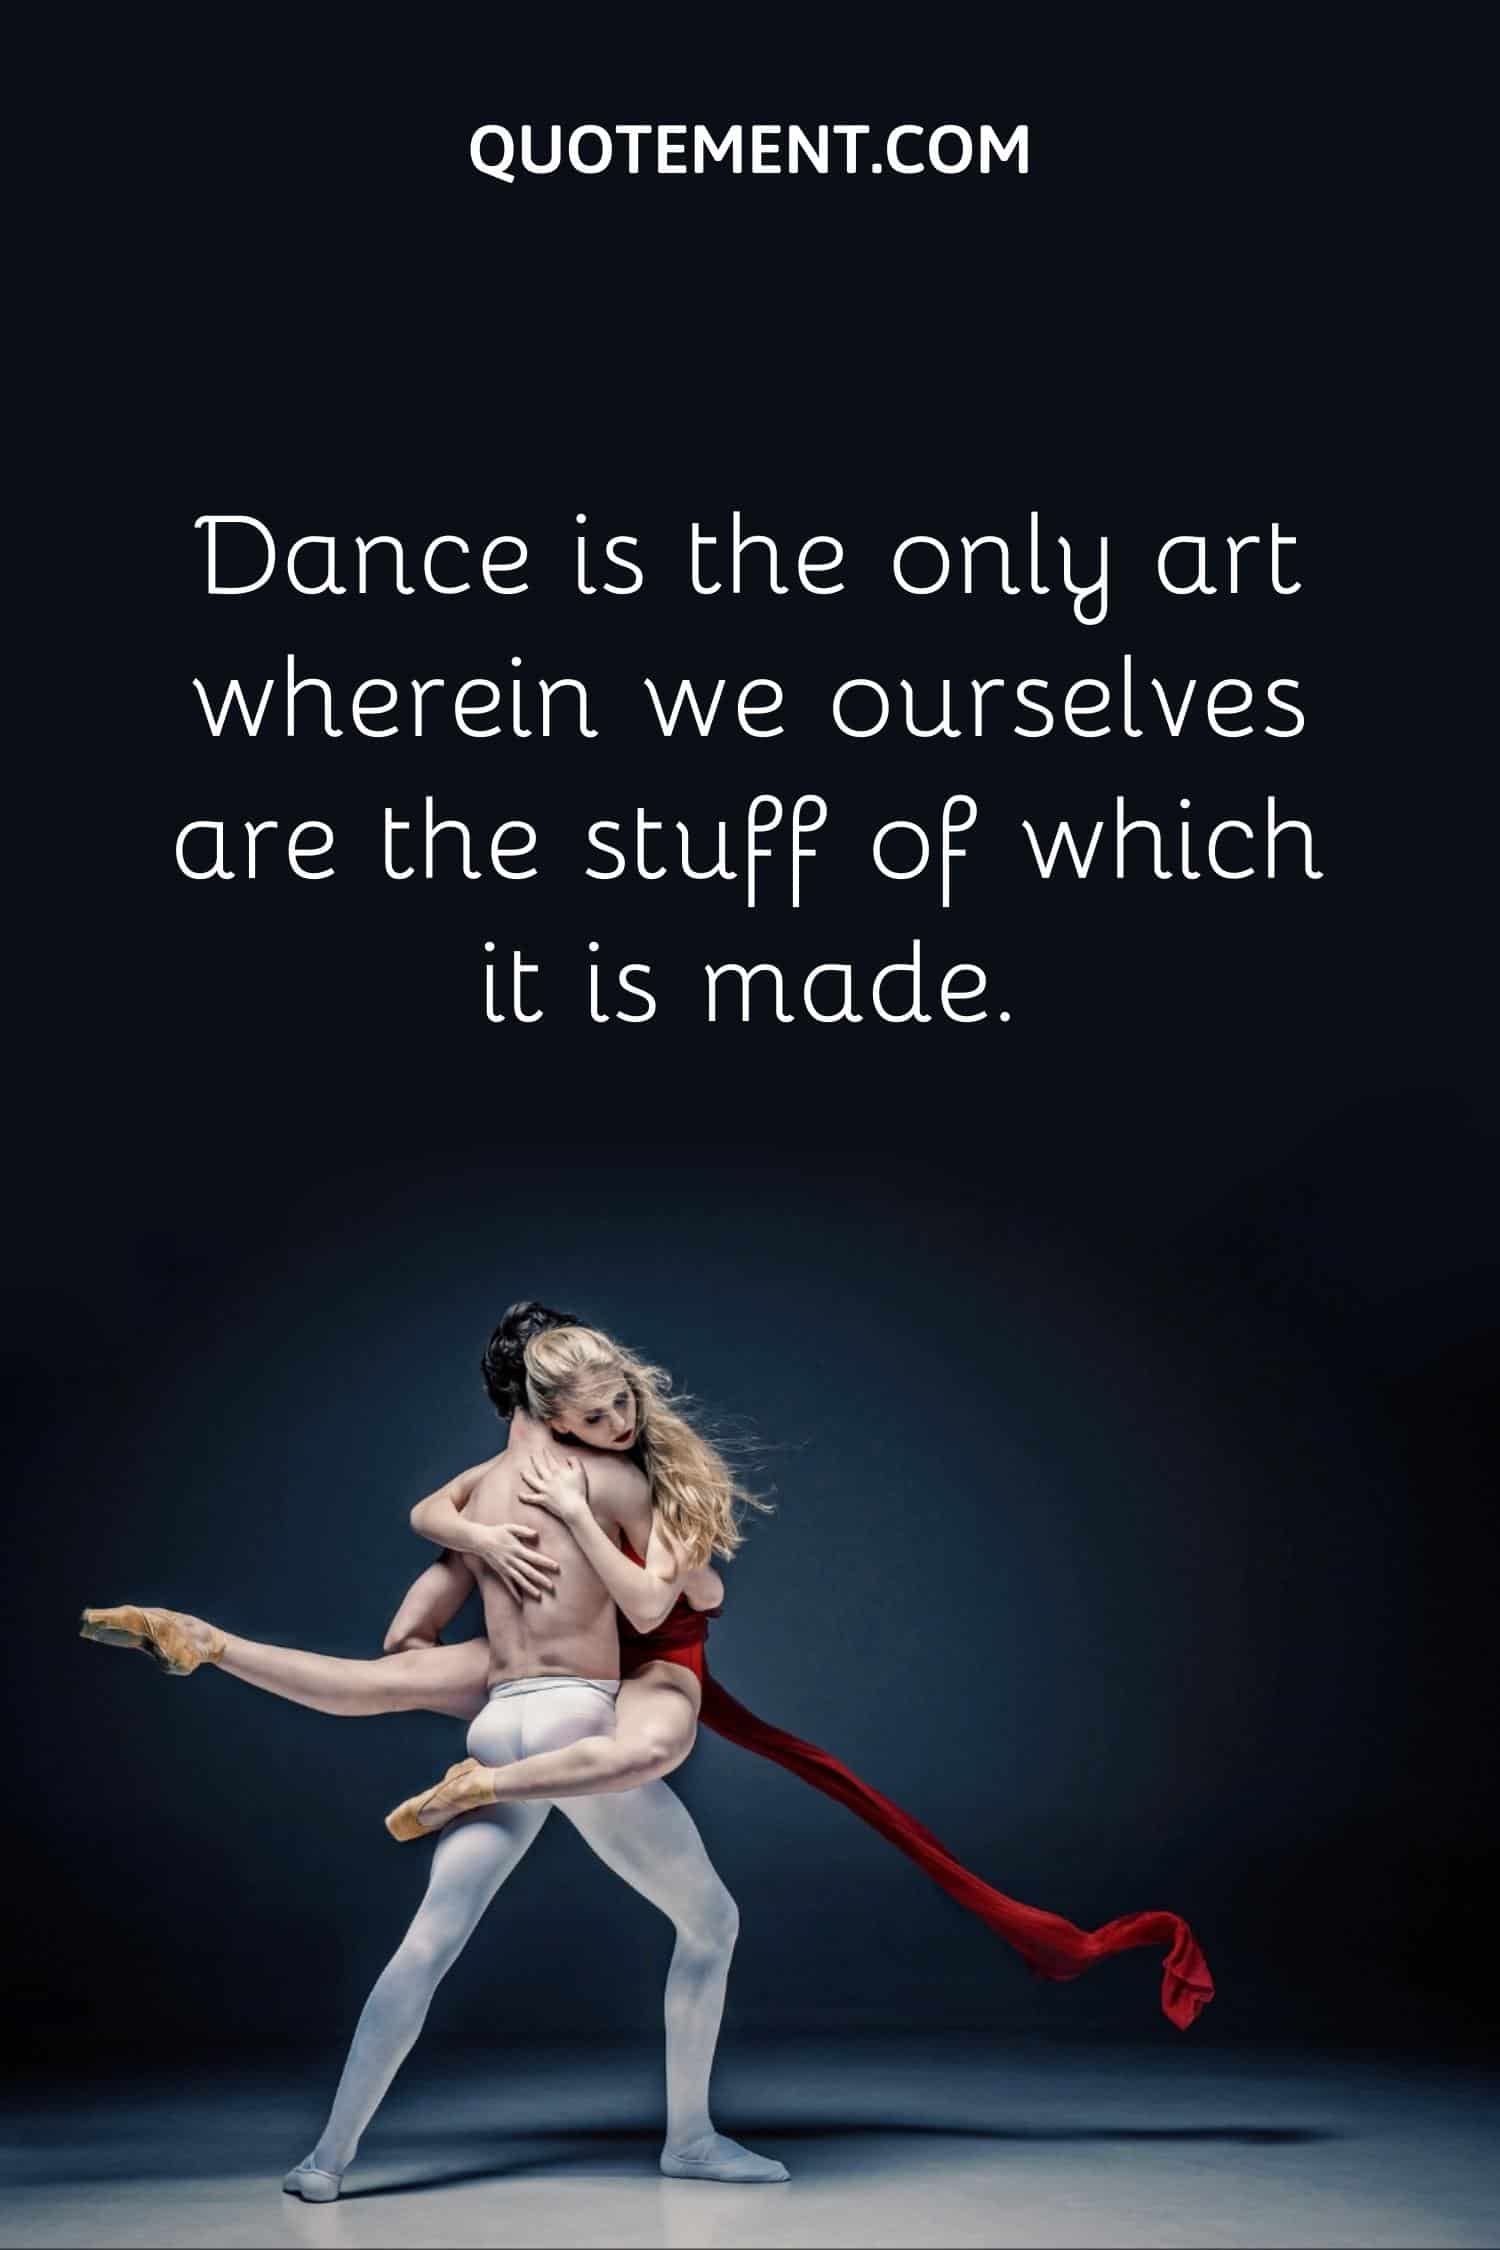 Dance is the only art wherein we ourselves are the stuff of which it is made